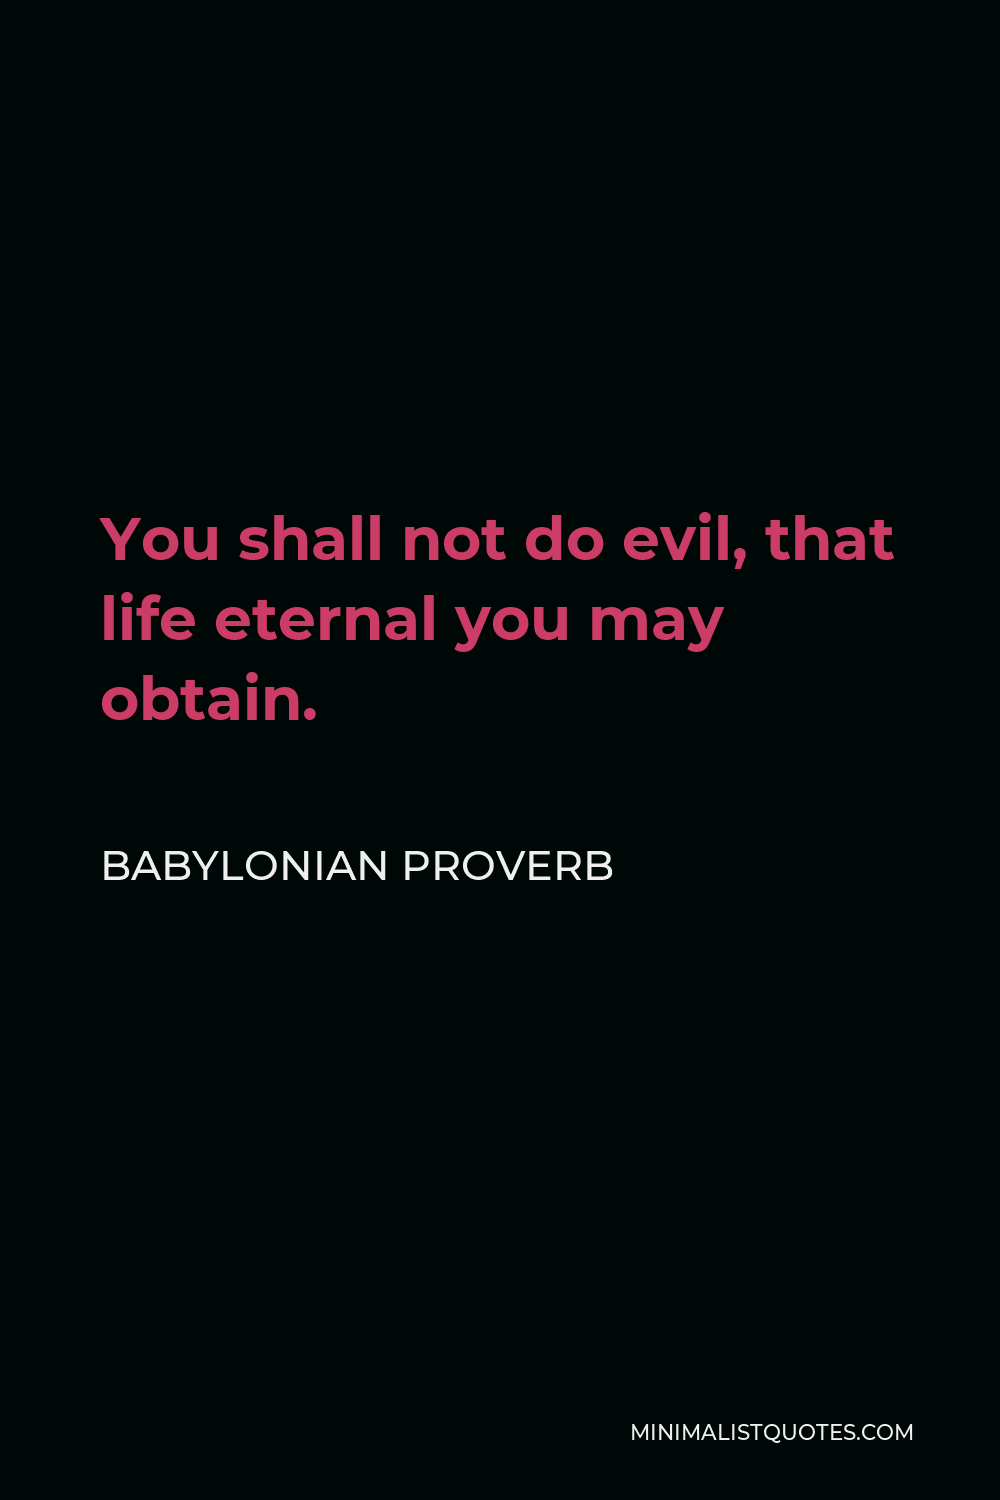 Babylonian Proverb Quote - You shall not do evil, that life eternal you may obtain.